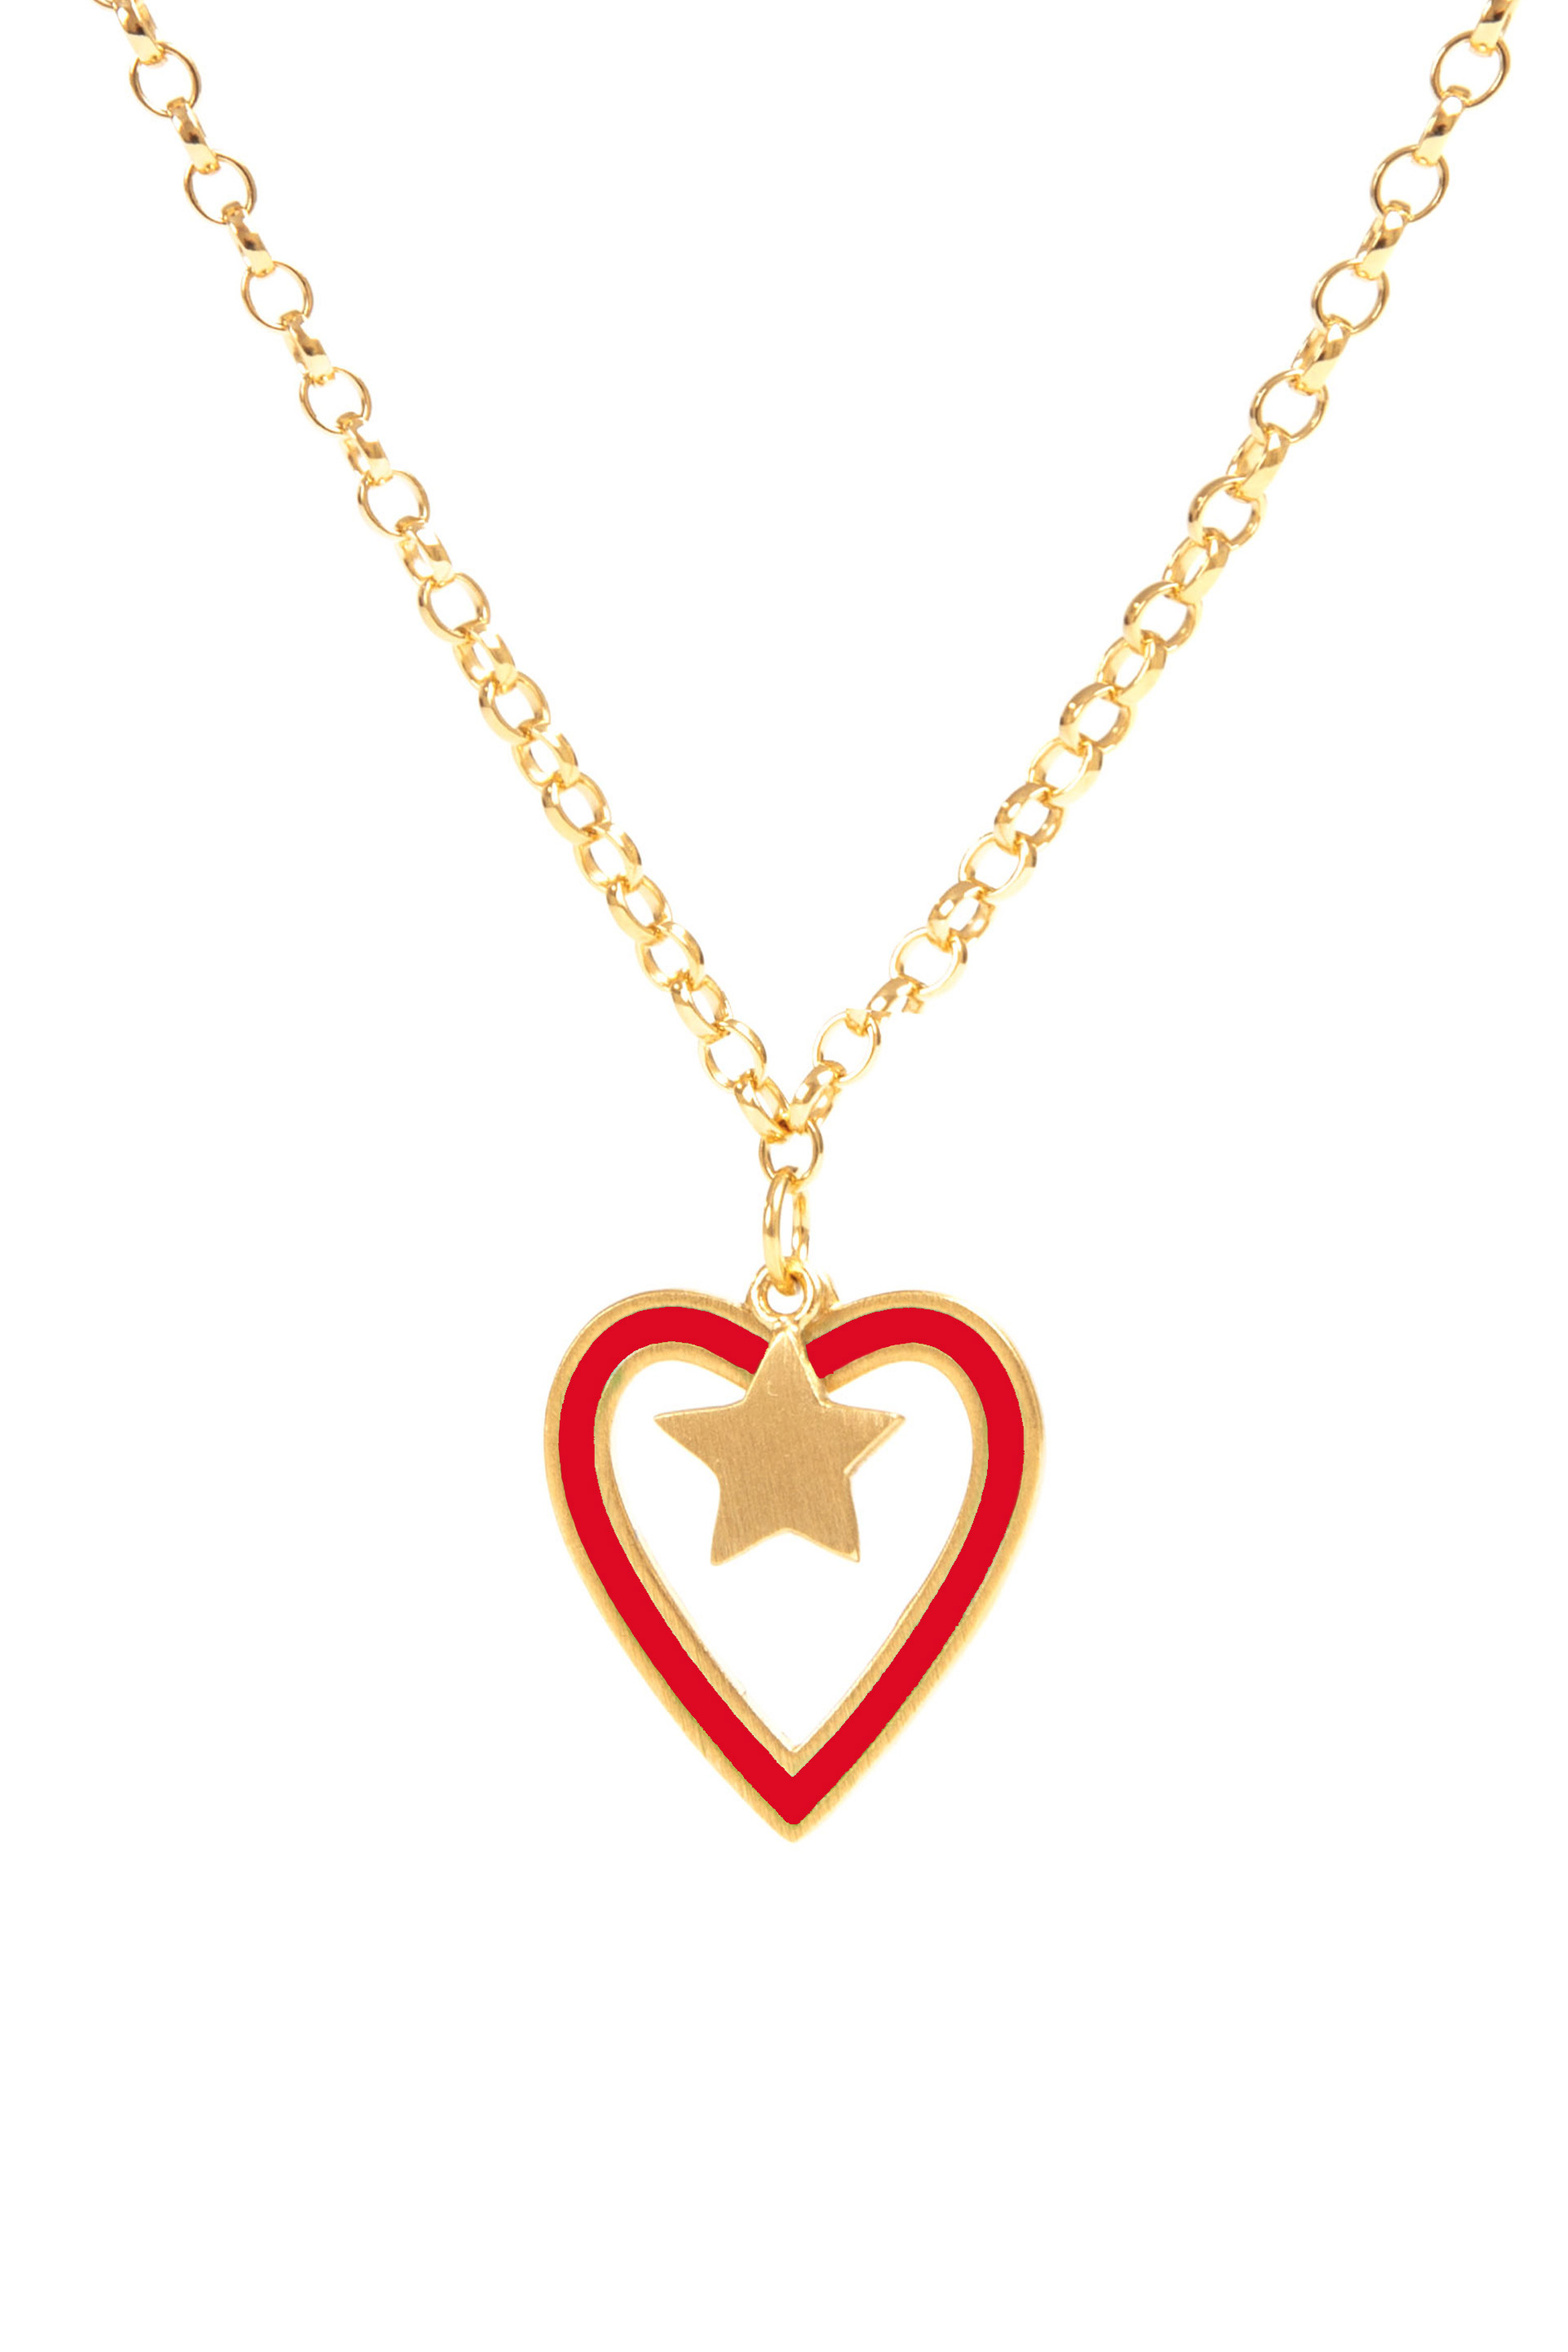 cb163_heart_necklace_red_heart_gold_chain_resized_edit_aw20.jpg